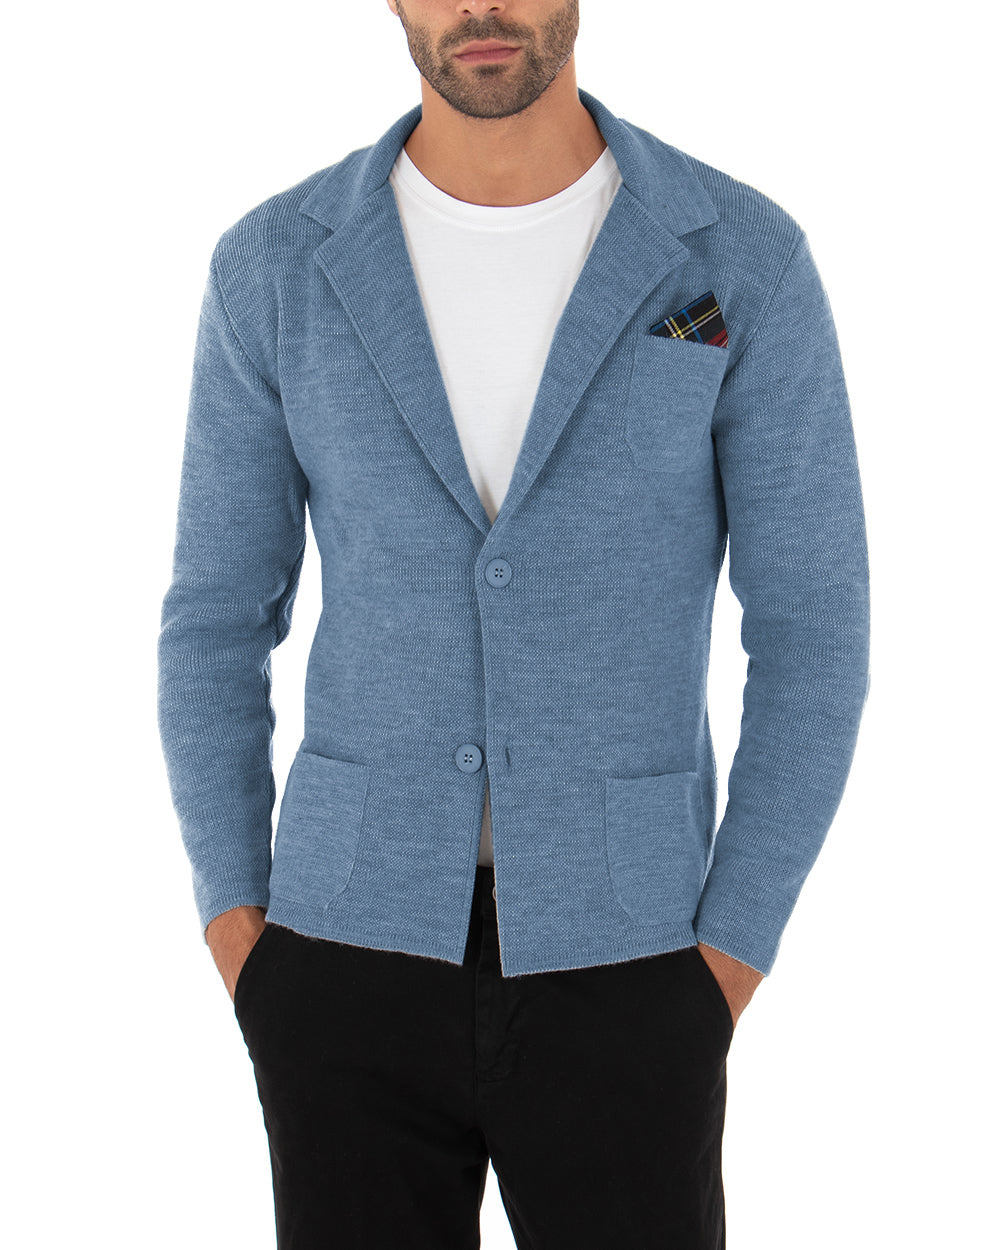 Men's Cardigan Jacket With Buttons Knit Sweater Solid Color Beige Casual GIOSAL-M2667A